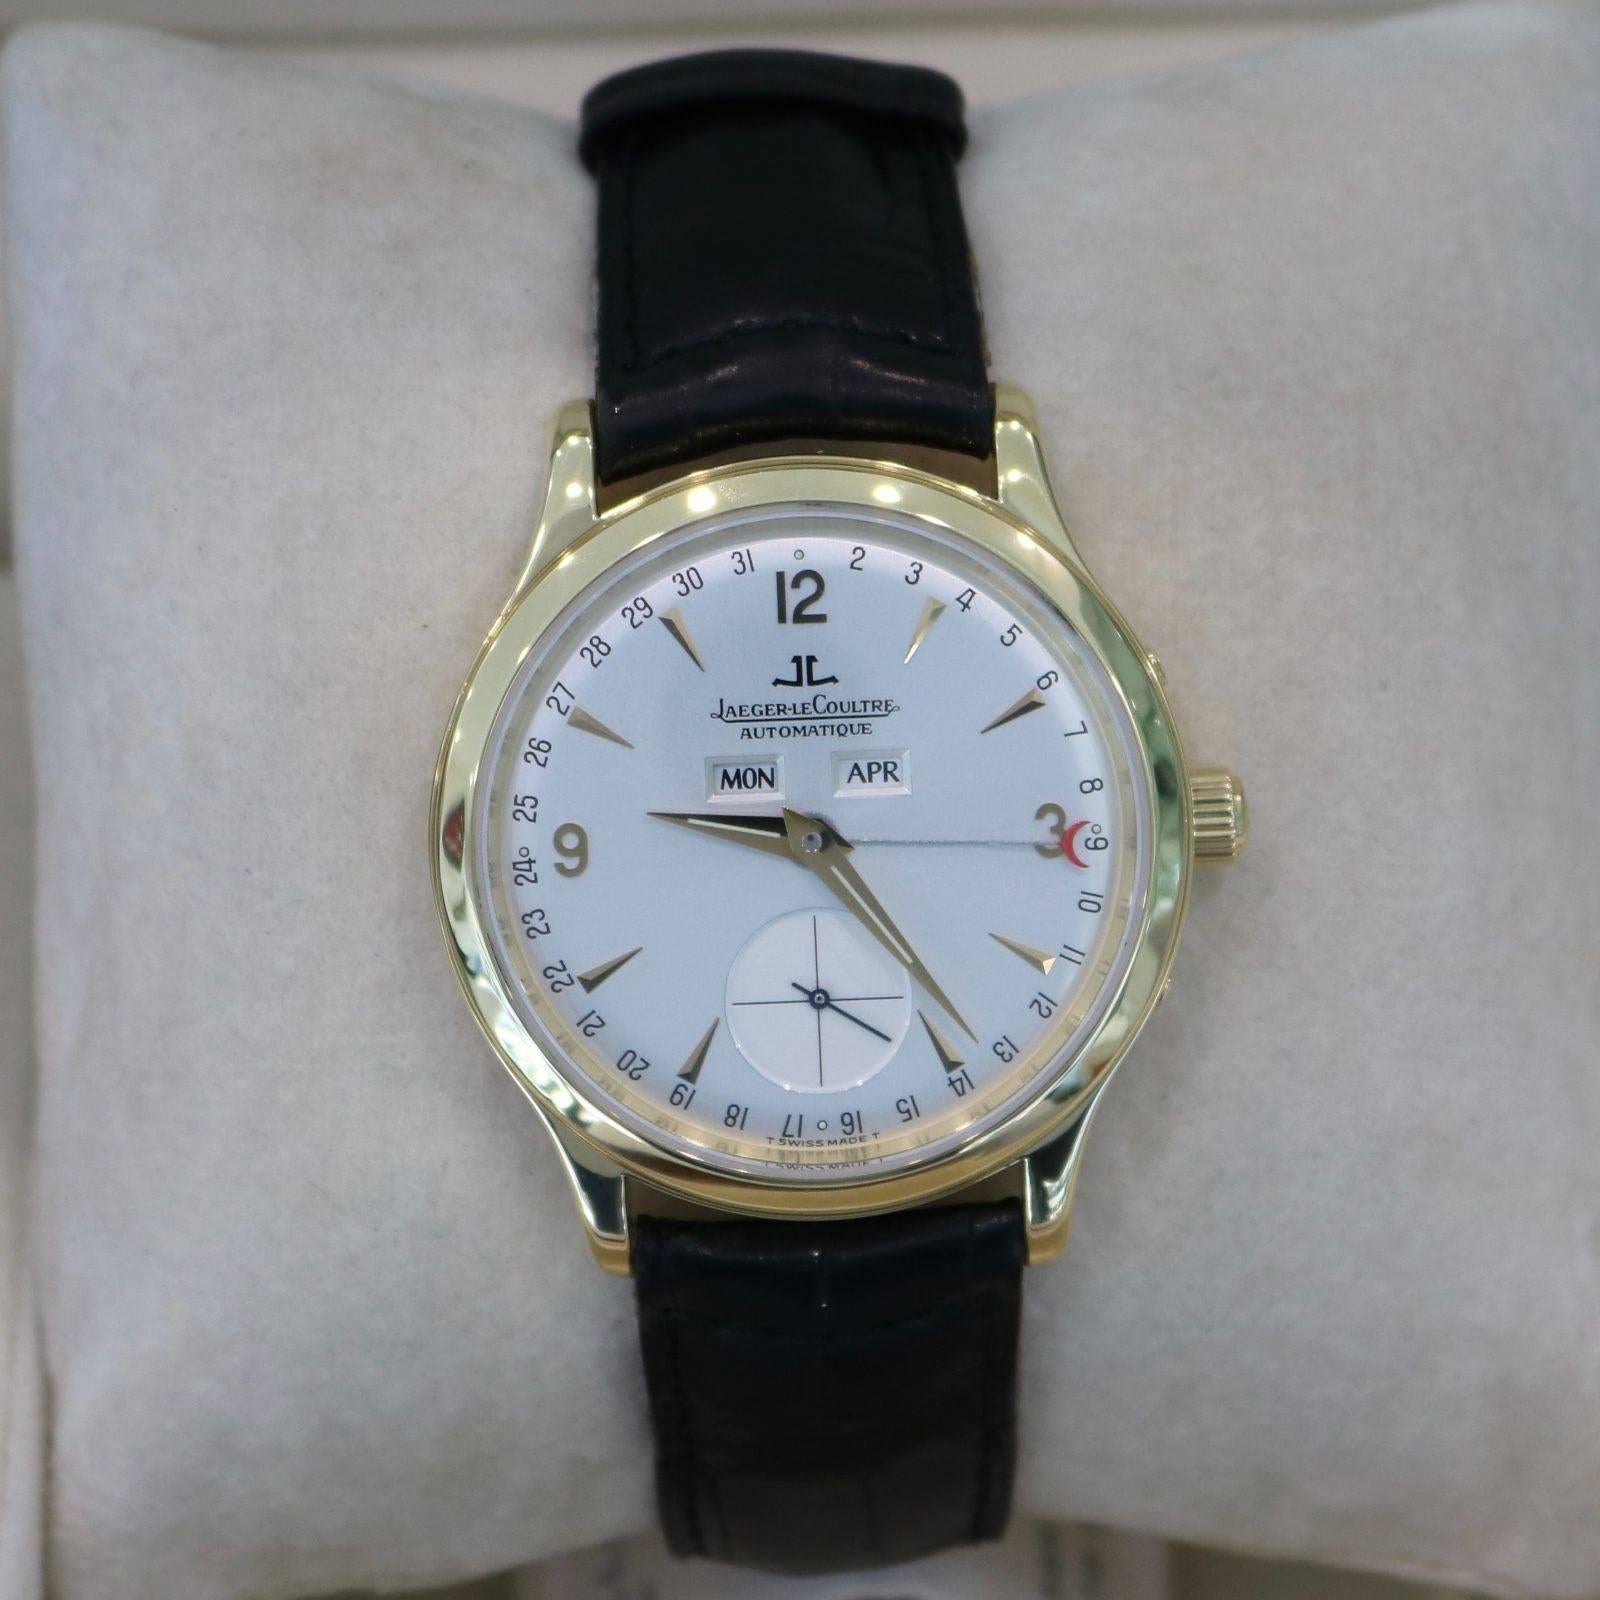 Brand Name:  Jaeger LeCoultre
Style Number:  140.1.87
Series:  Master Calendar
Gender:  Men's
Case Material:  18k Yellow Gold
Dial Color:  Silver
Movement:  Automatic
Engine:  JLC Cal. 891/447 Basis Cal: JLC 889/1
Functions:  Hours, Minutes,